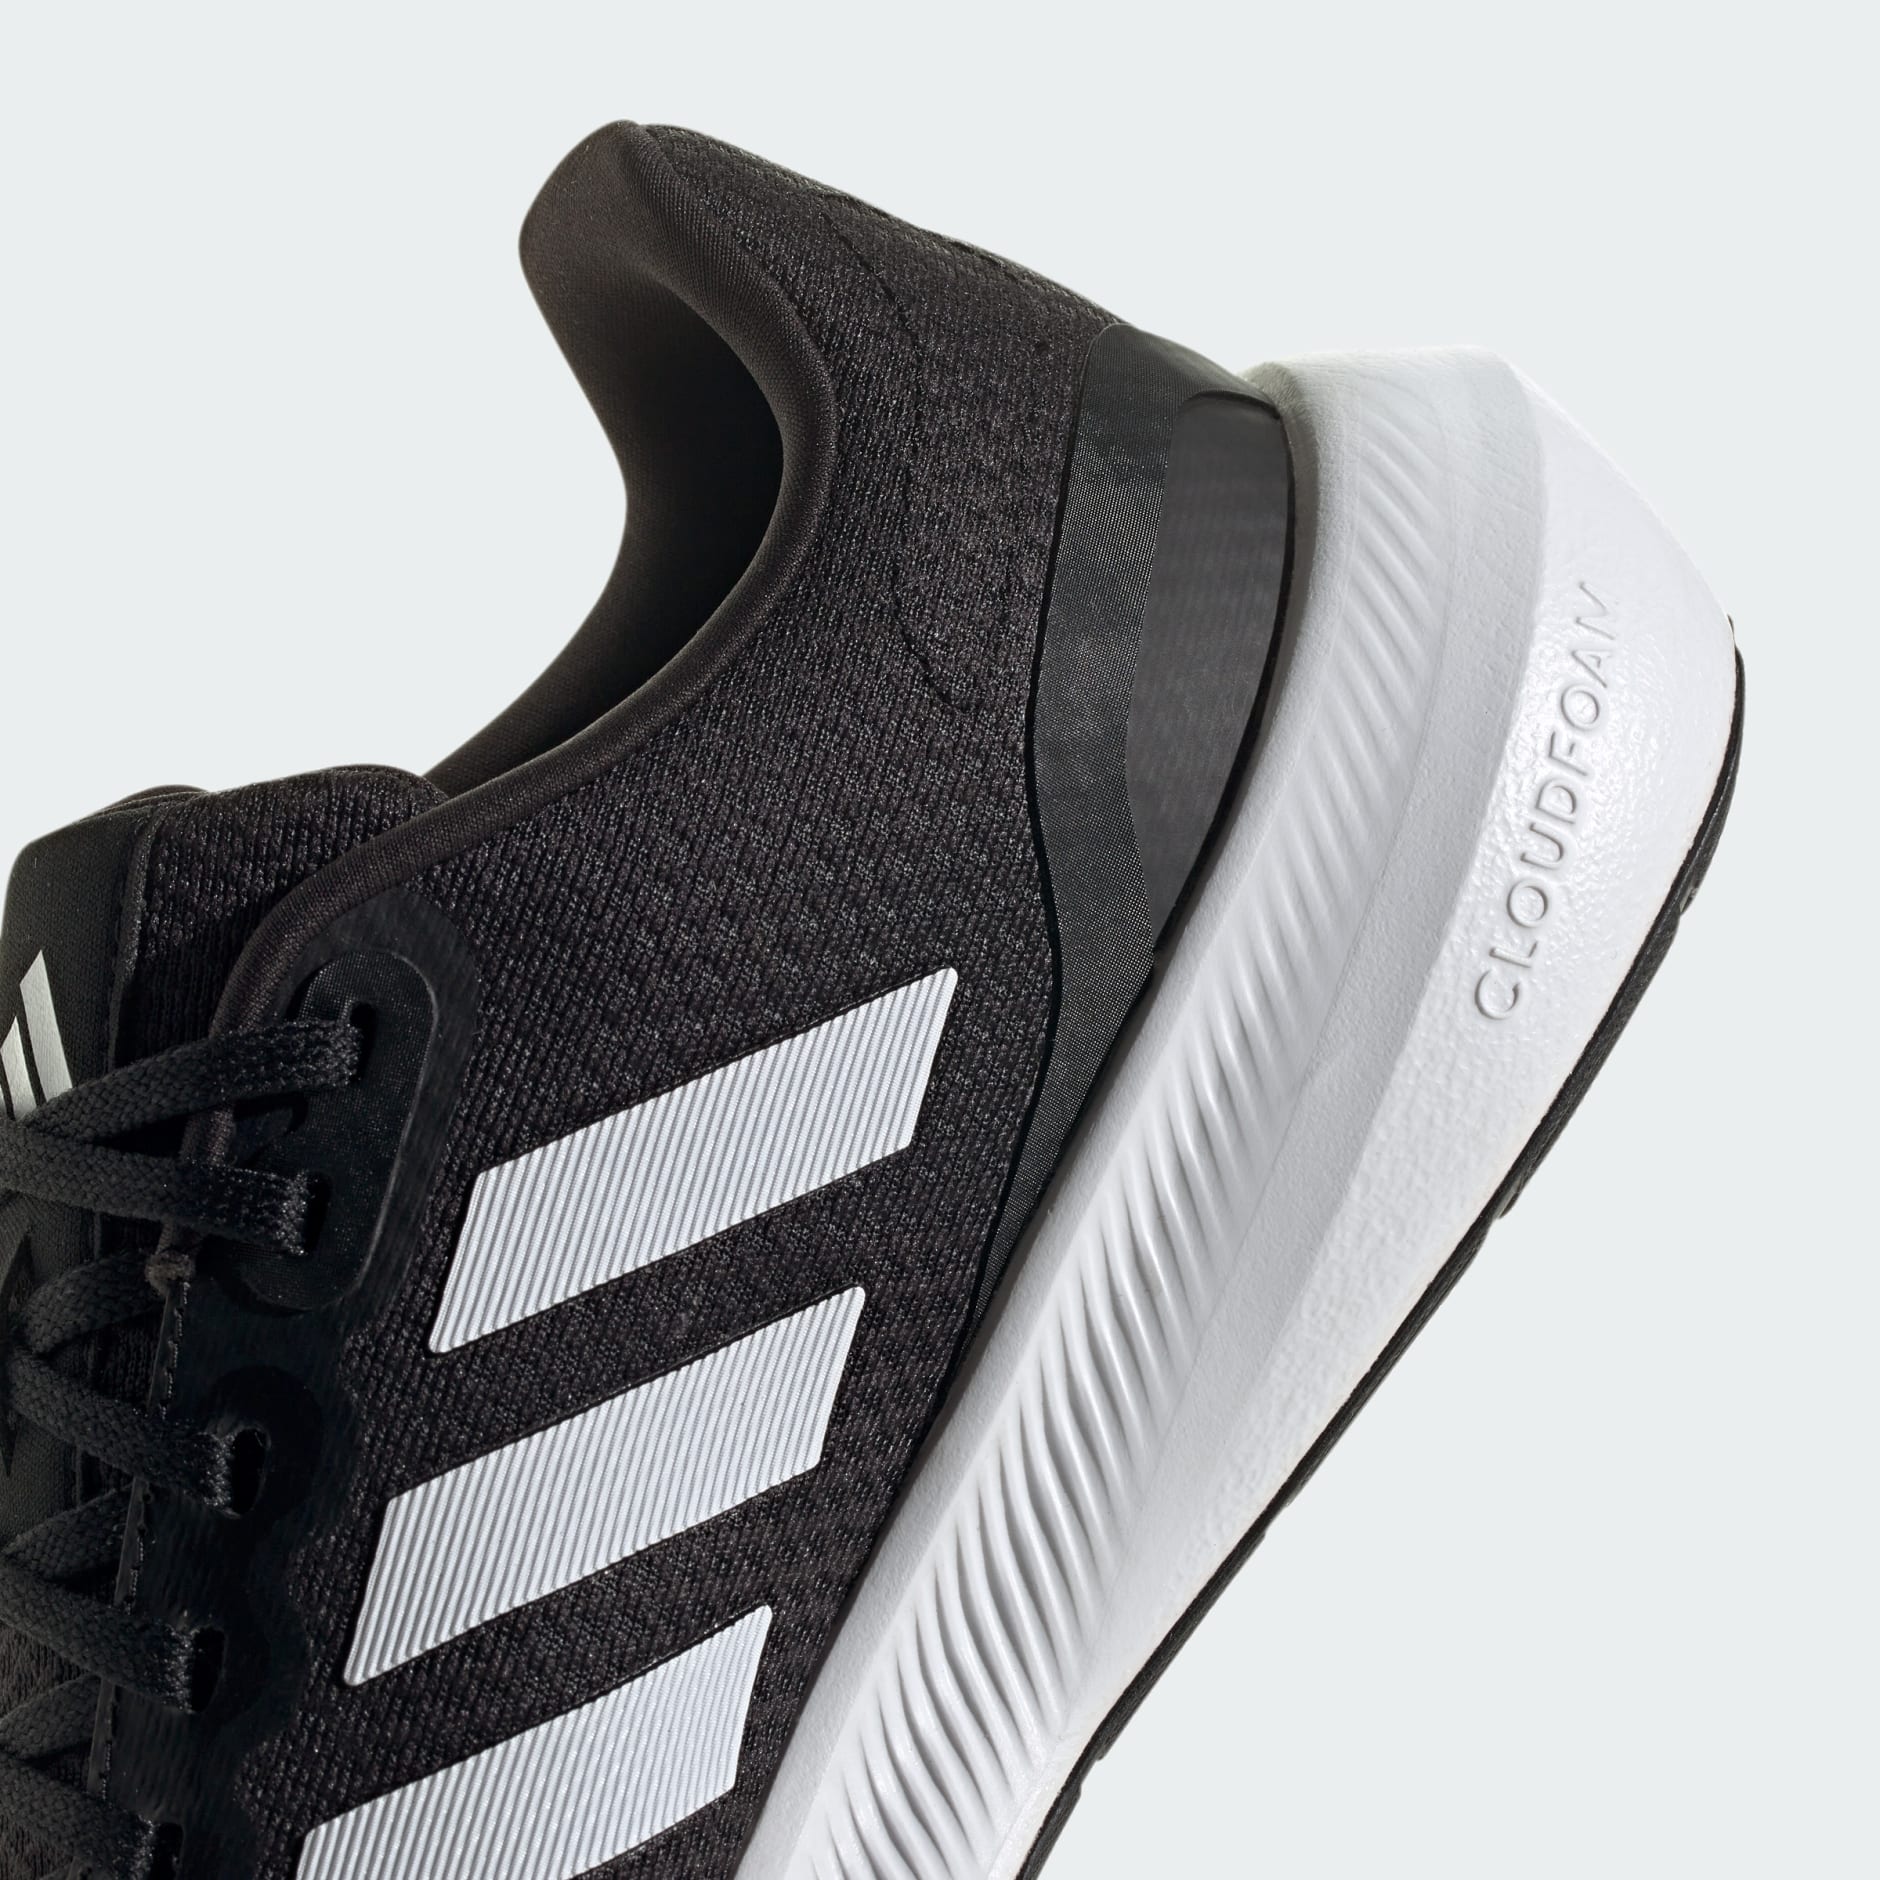 Shoes - Runfalcon 3.0 Shoes - Black | adidas South Africa